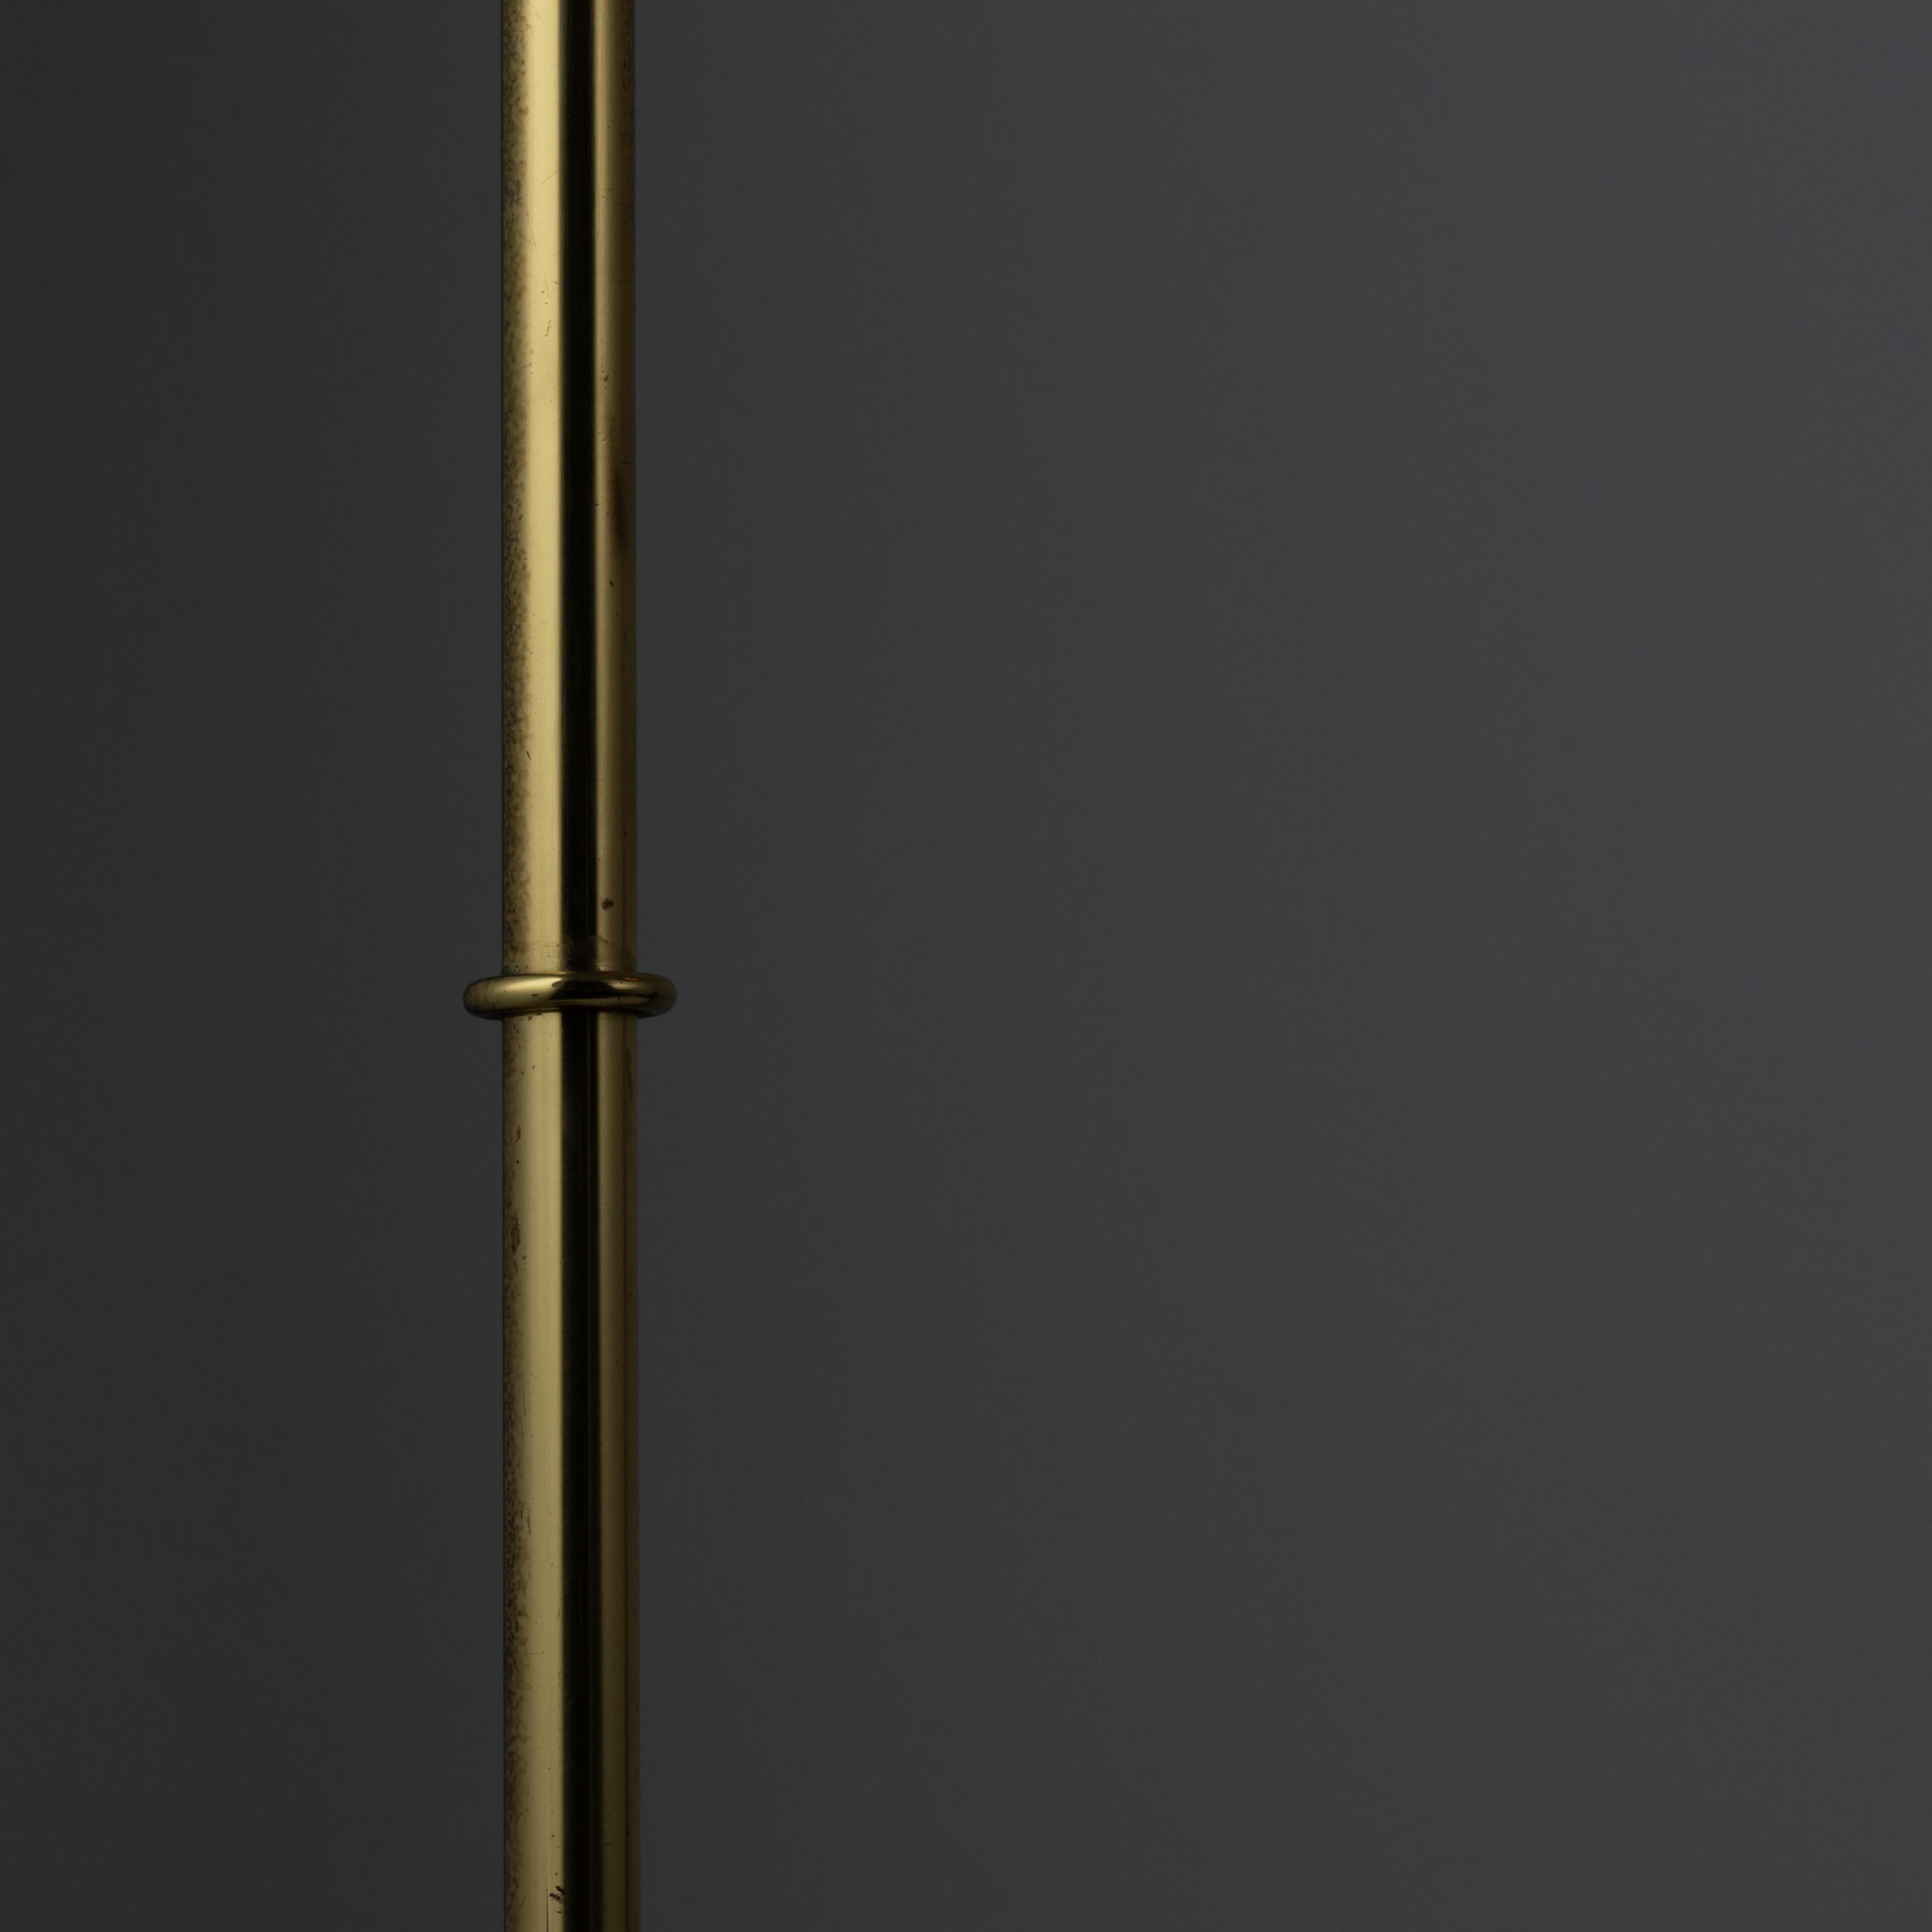 Polished Rare Brass Floor Lamp by Valenti